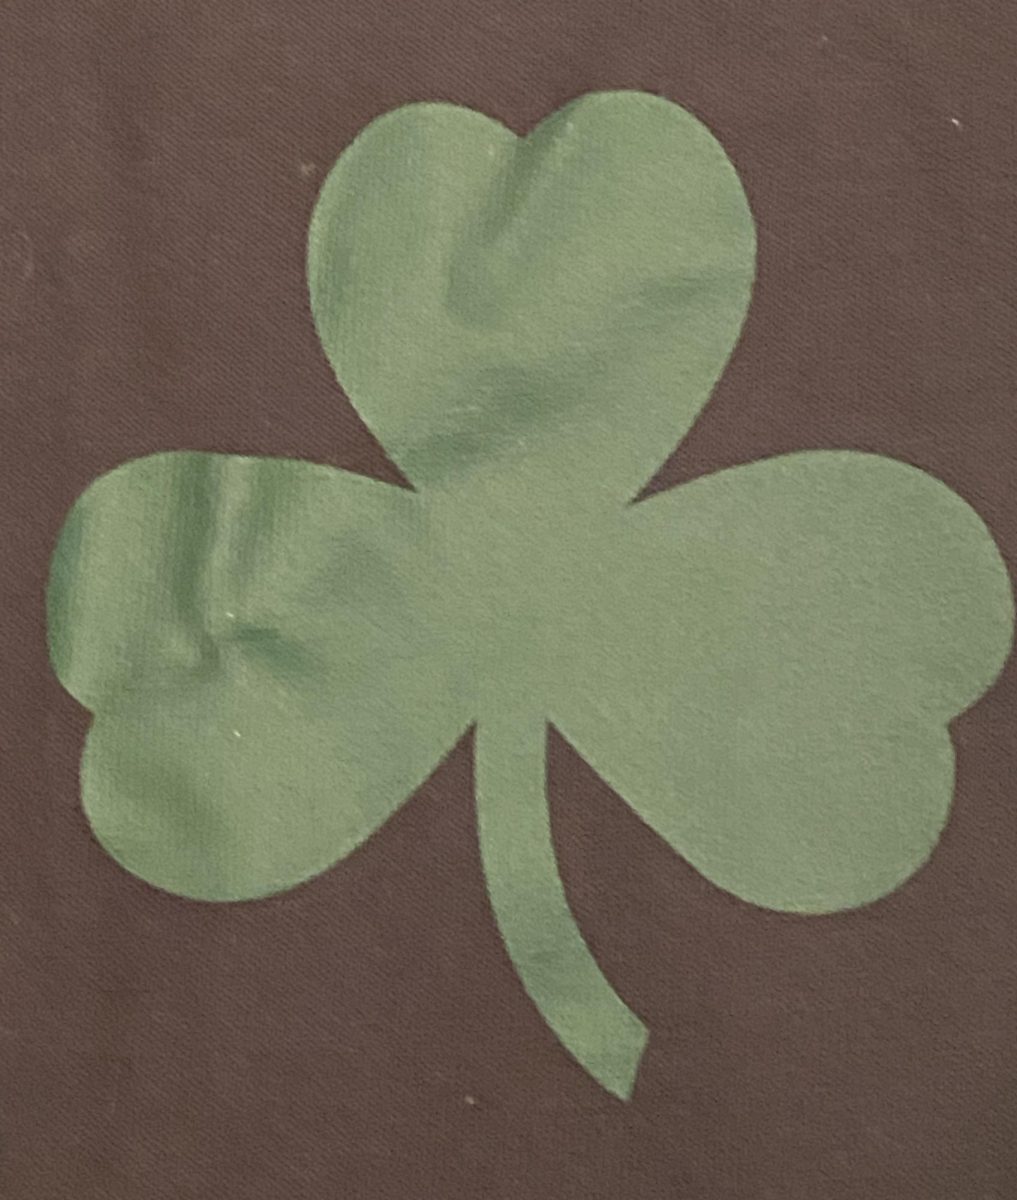 A Green shamrock which is symbolic of the Irish and St. Patricks Day